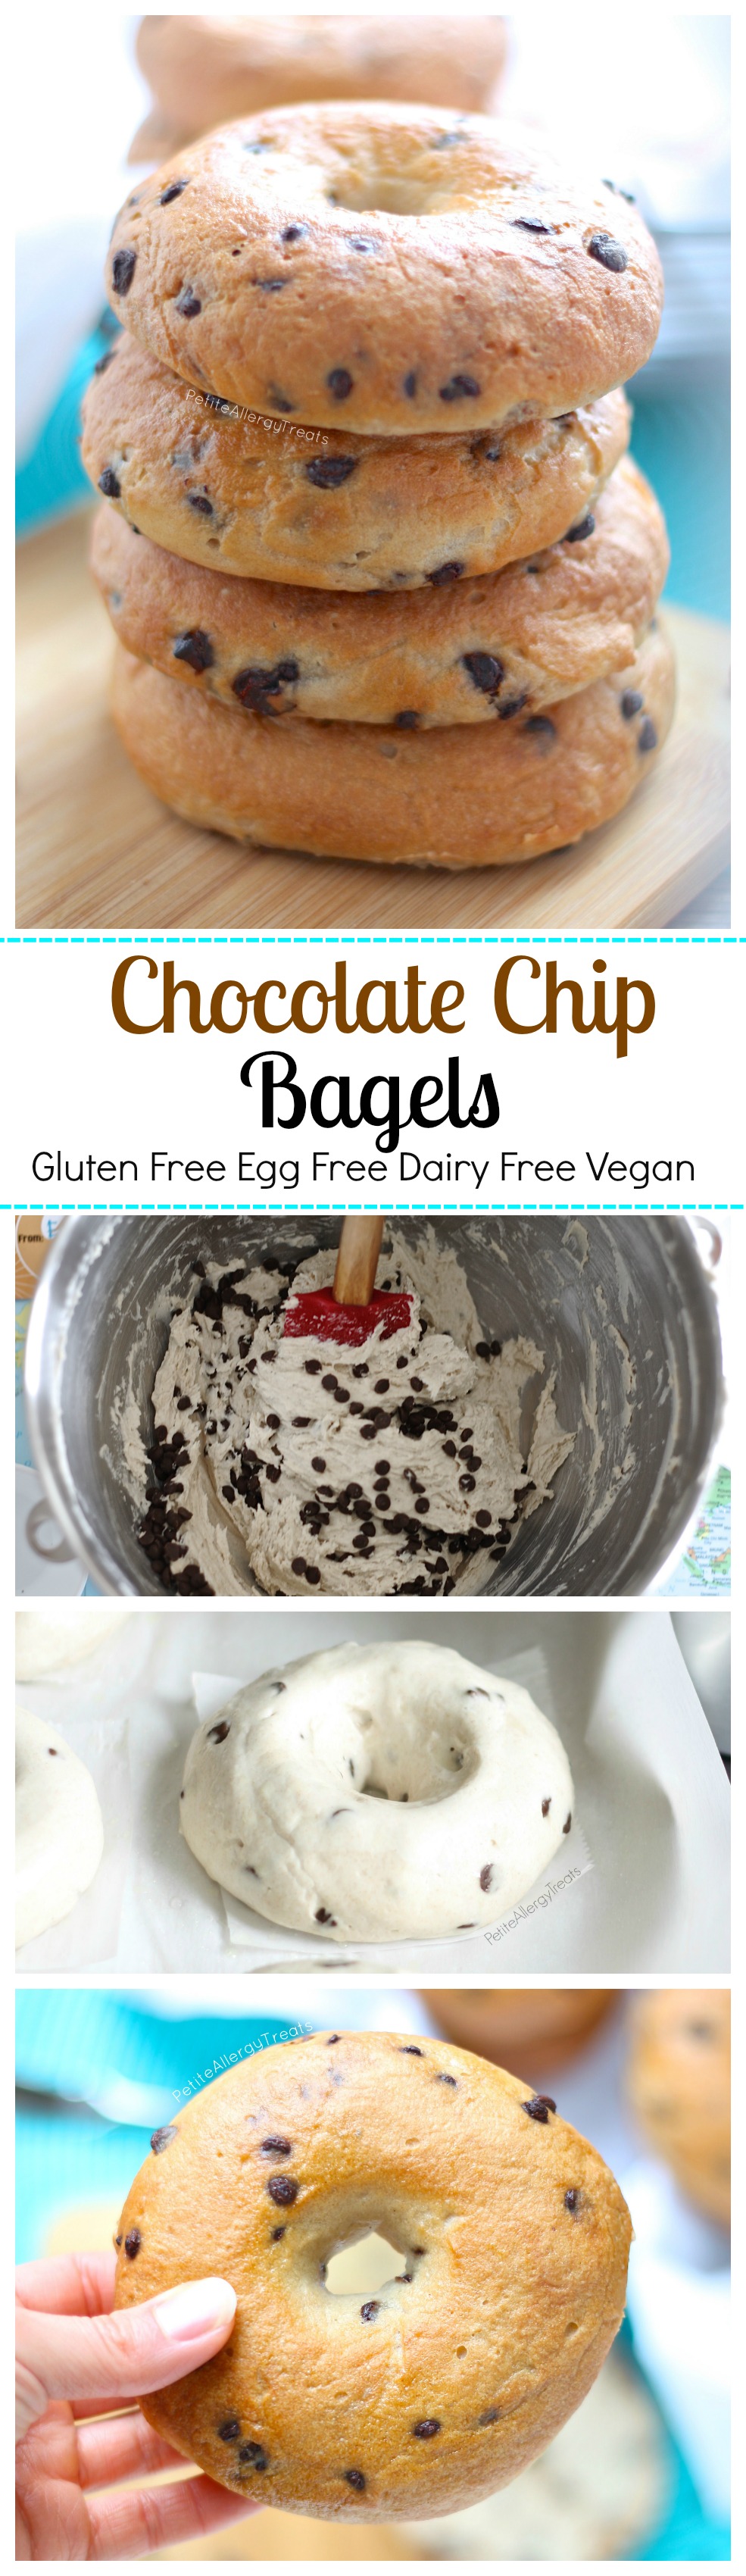 Bagels with Chocolate Chips (Gluten Free Egg Free Vegan)- Chewy bagels with bits of chocolate. Better than Panera! Allergy friendly too.